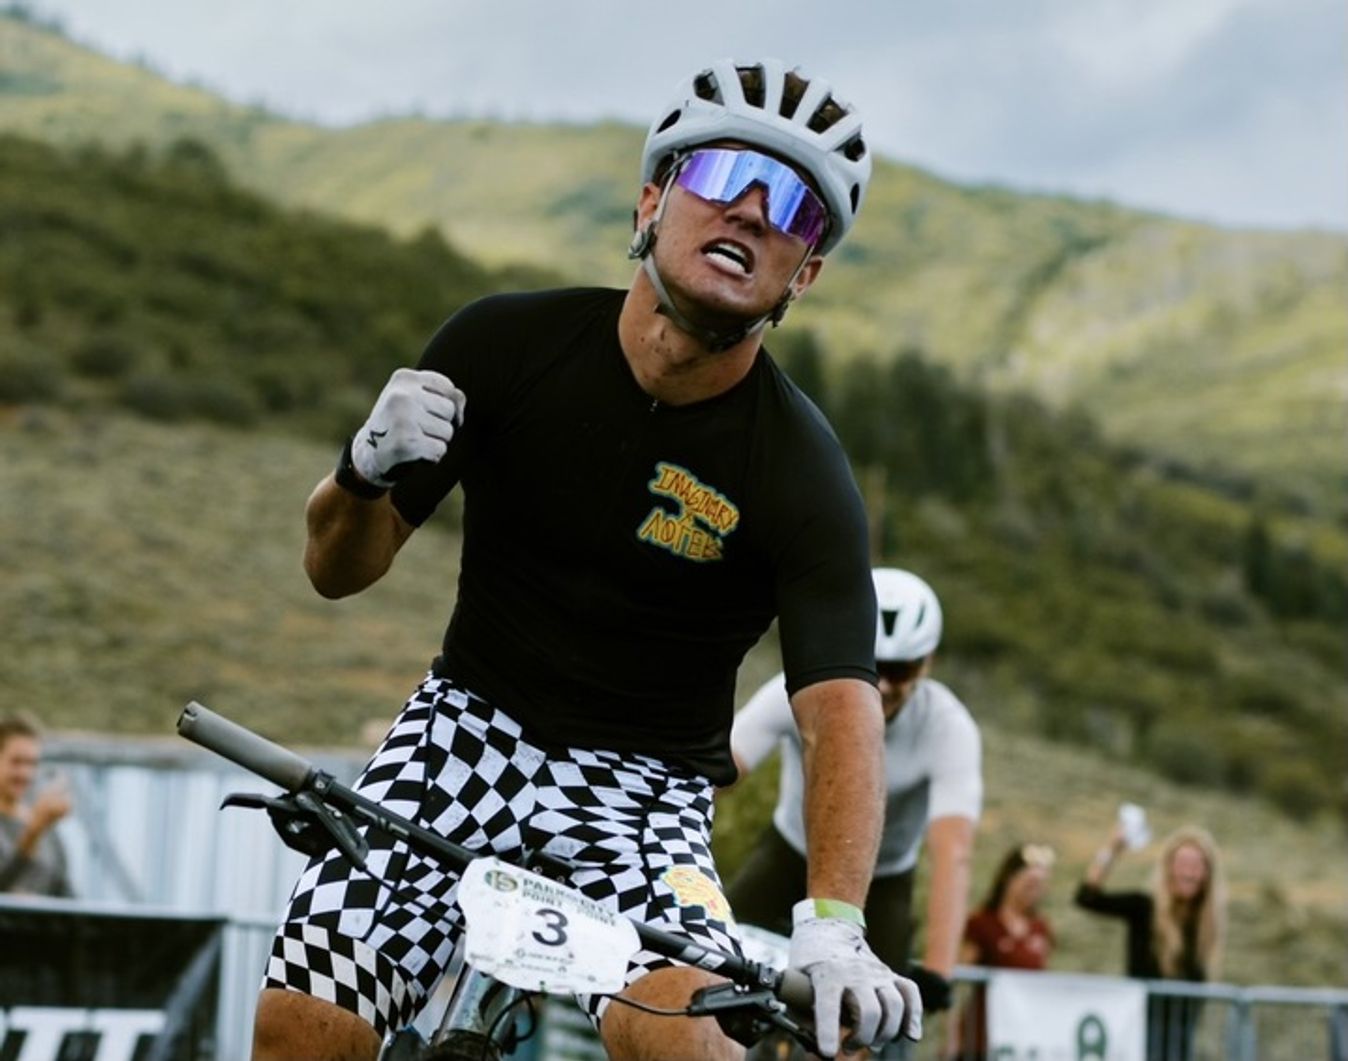 This past summer Glasgow won the Park City Point To Point mountain bike race, proving his metal against some of the best off-road cyclists in the country